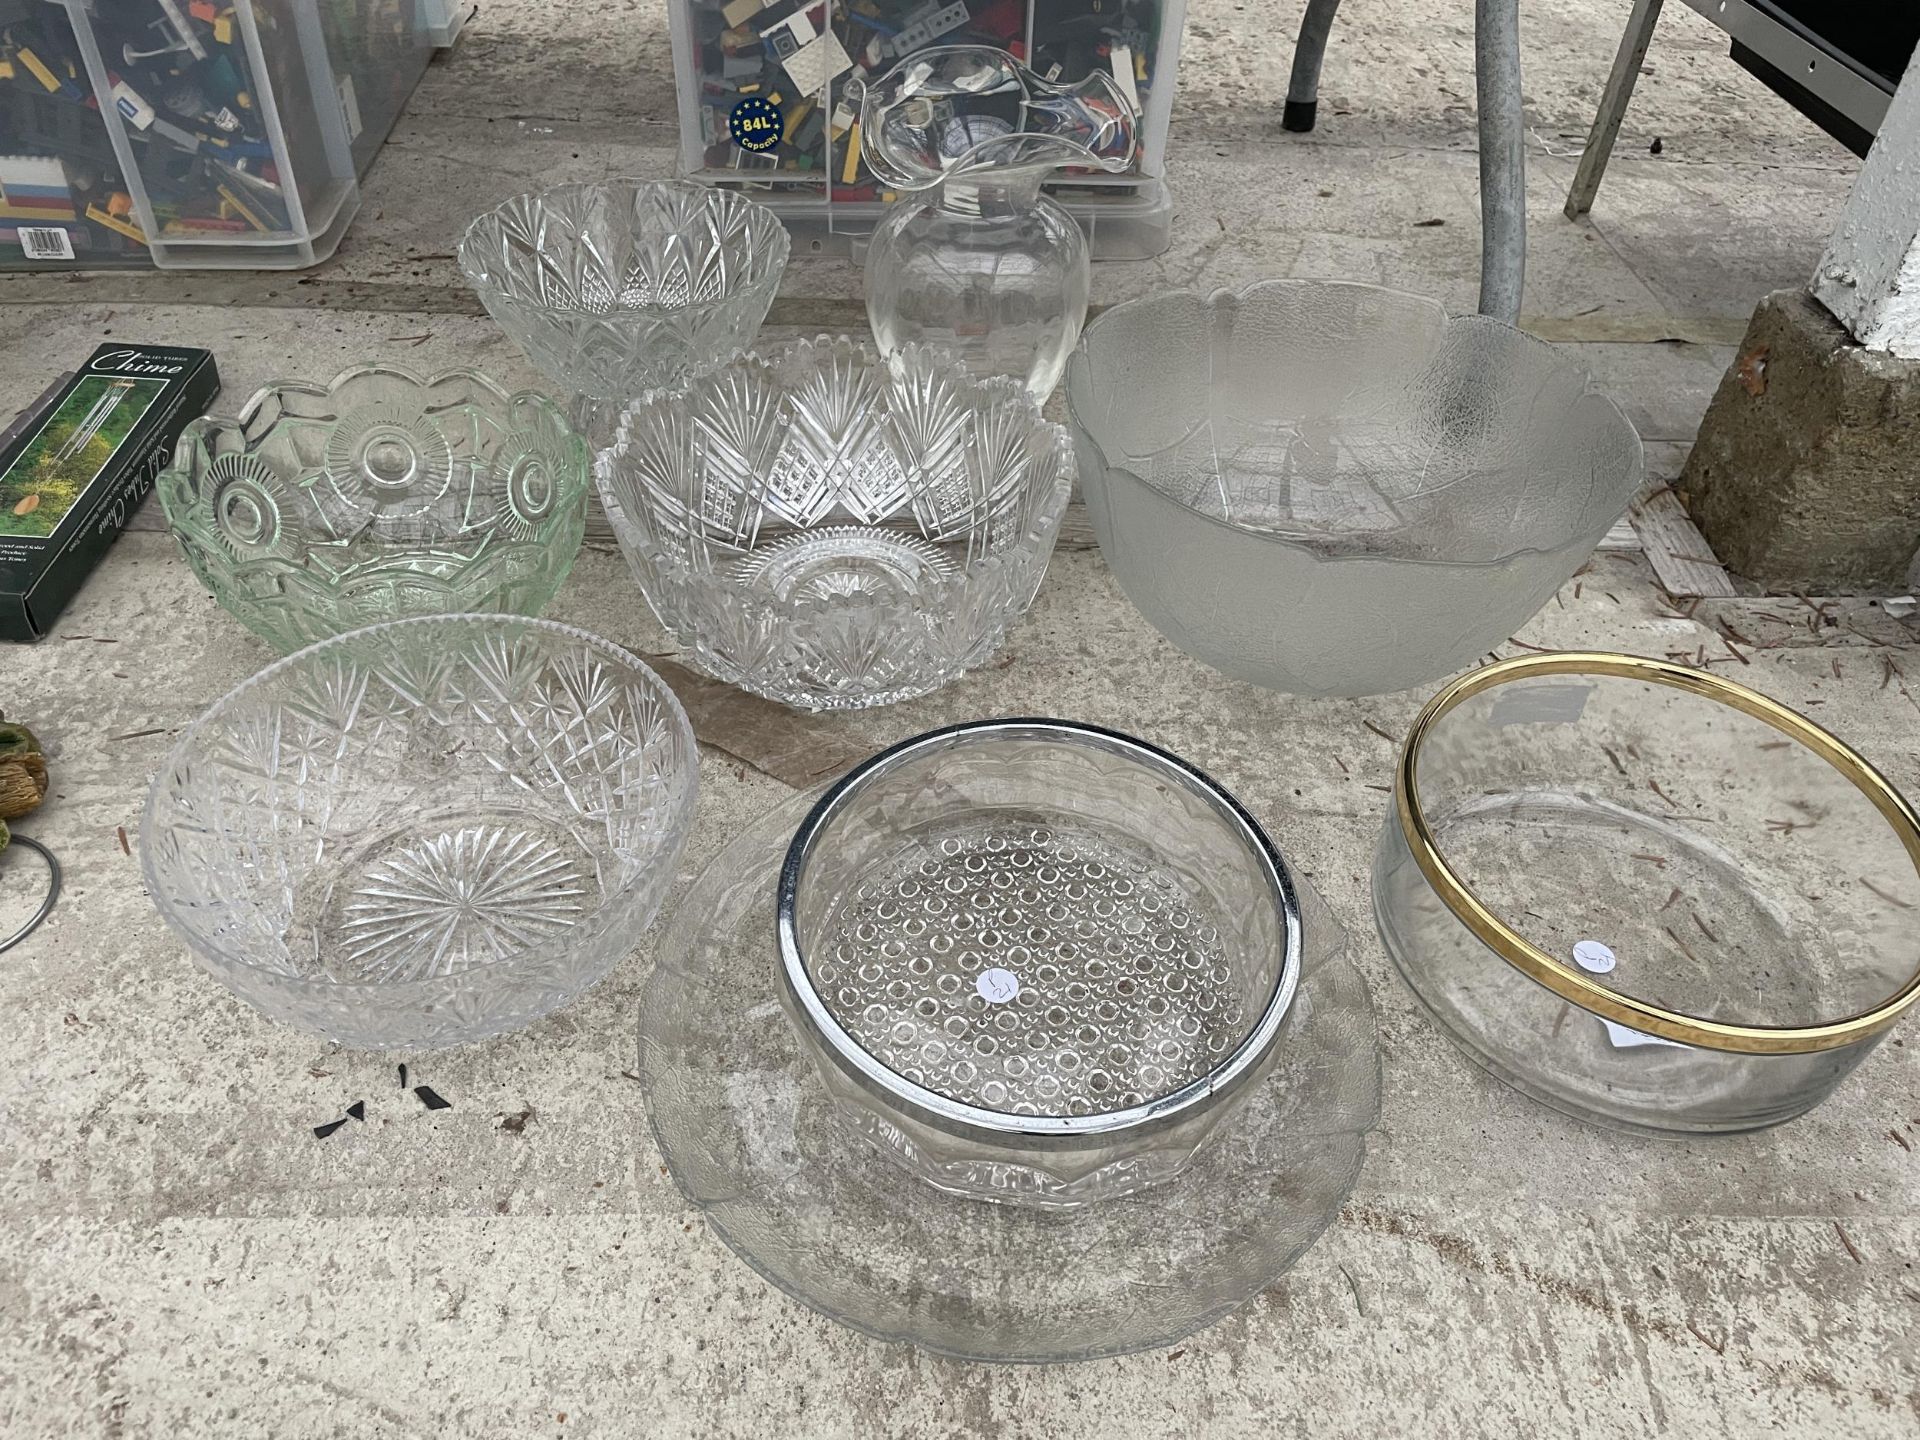 AN ASSORTMENT OF GLASS BOWLS AND VASES ETC